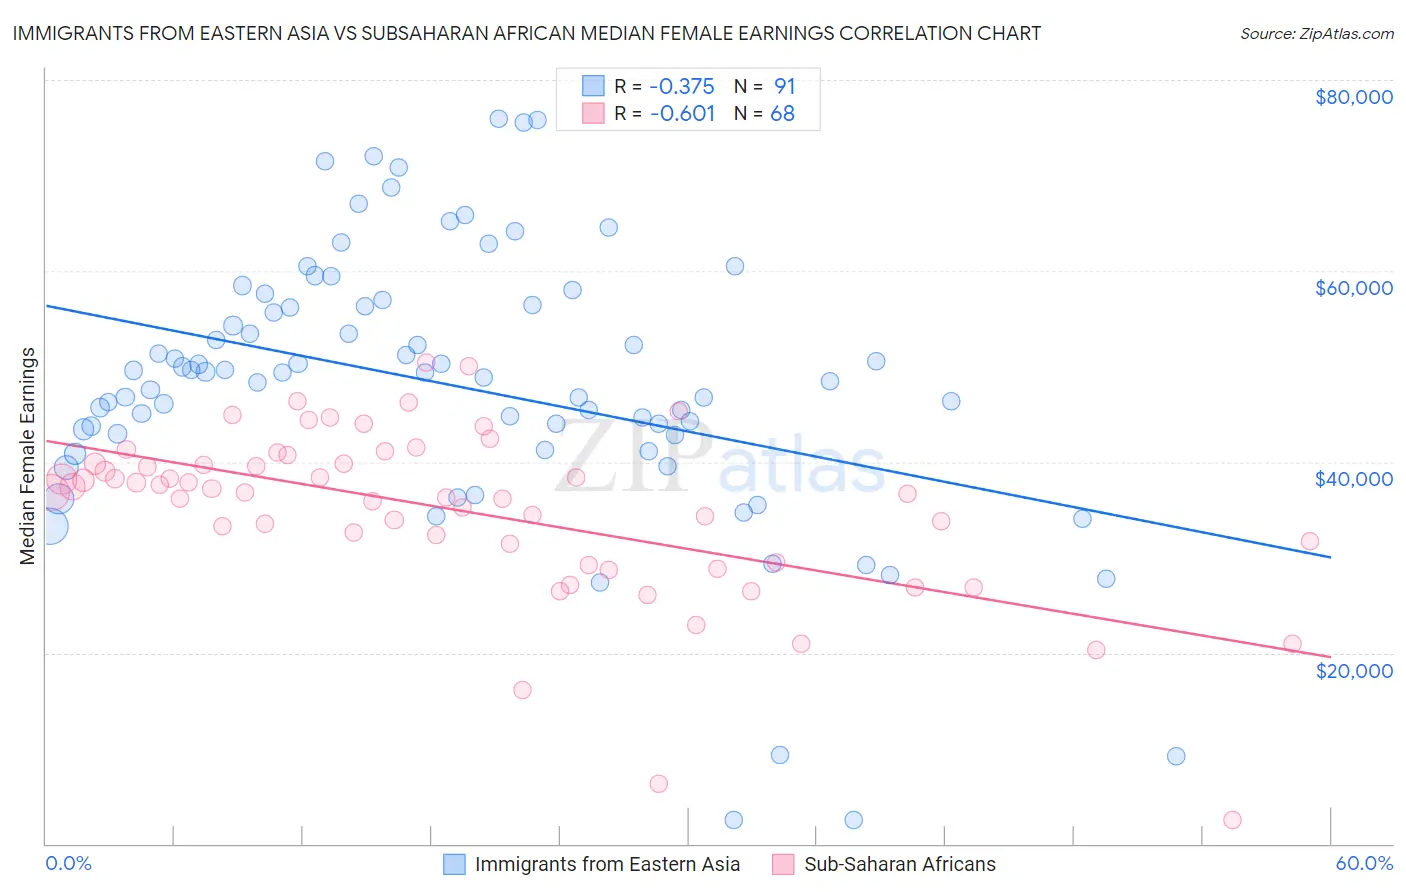 Immigrants from Eastern Asia vs Subsaharan African Median Female Earnings